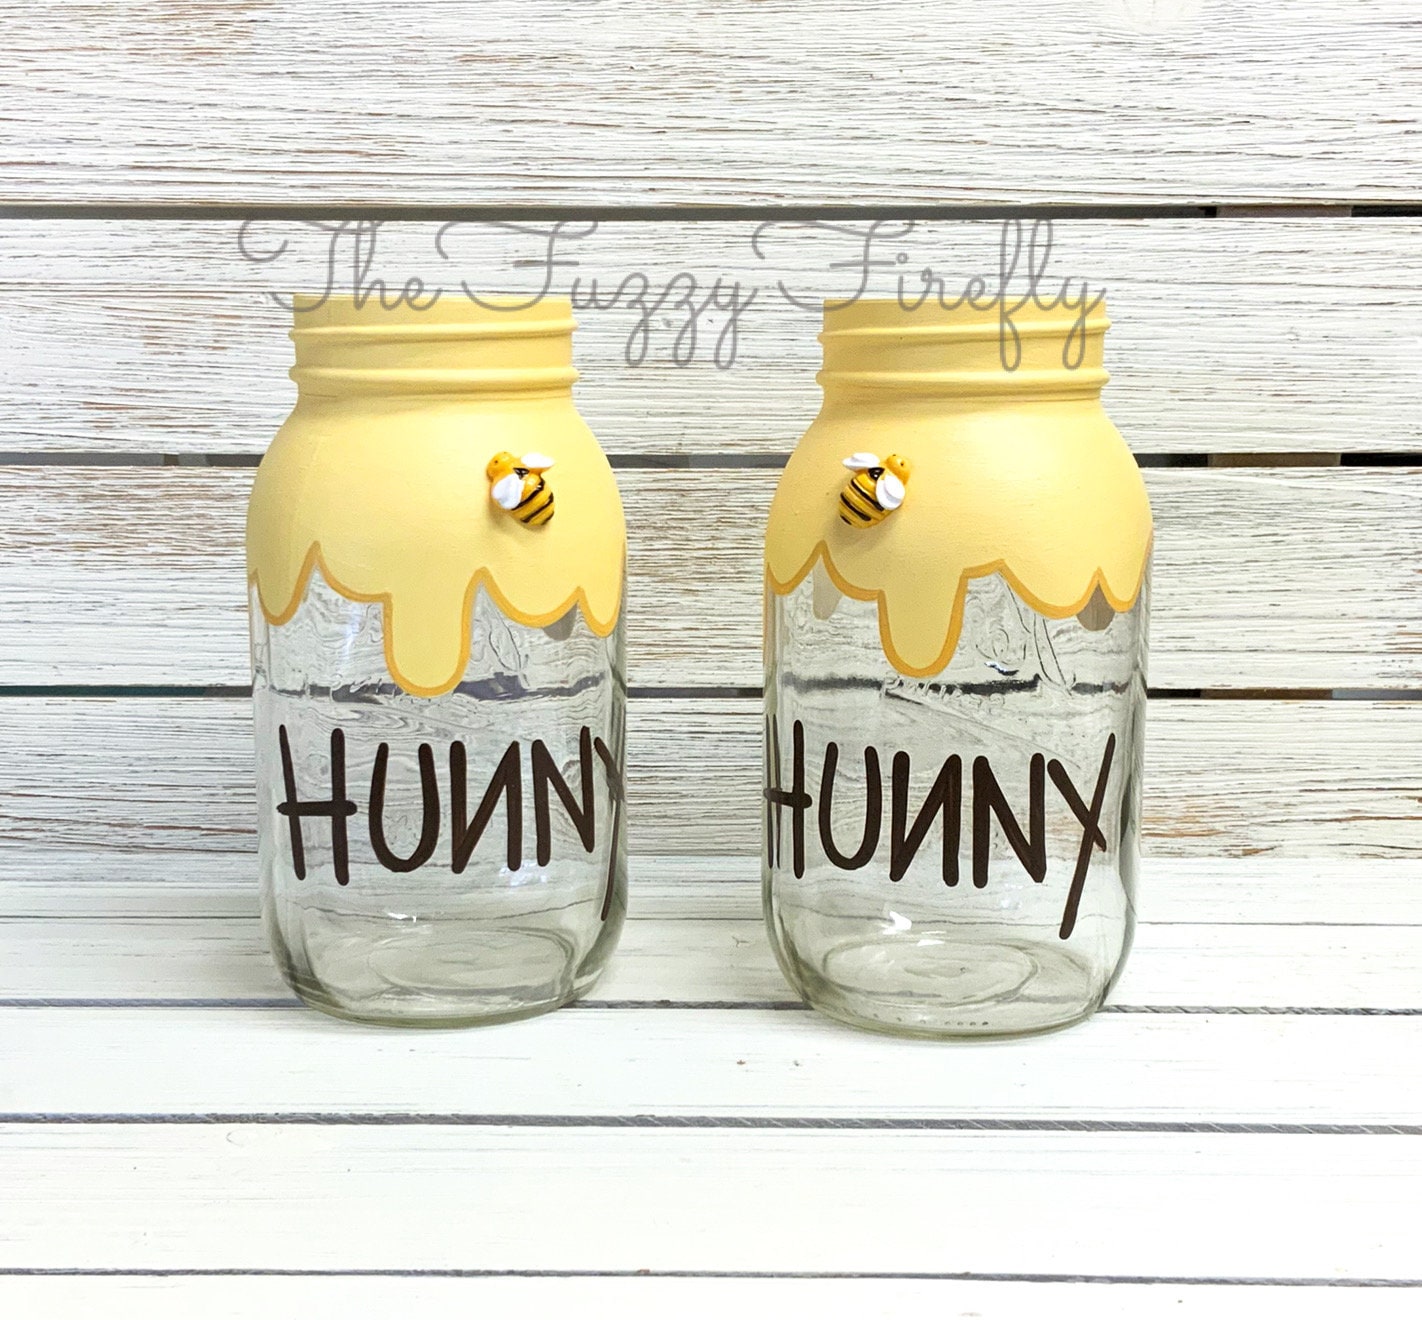 Winnie The Pooh Honey Pot Bag Is Too Cute for Words